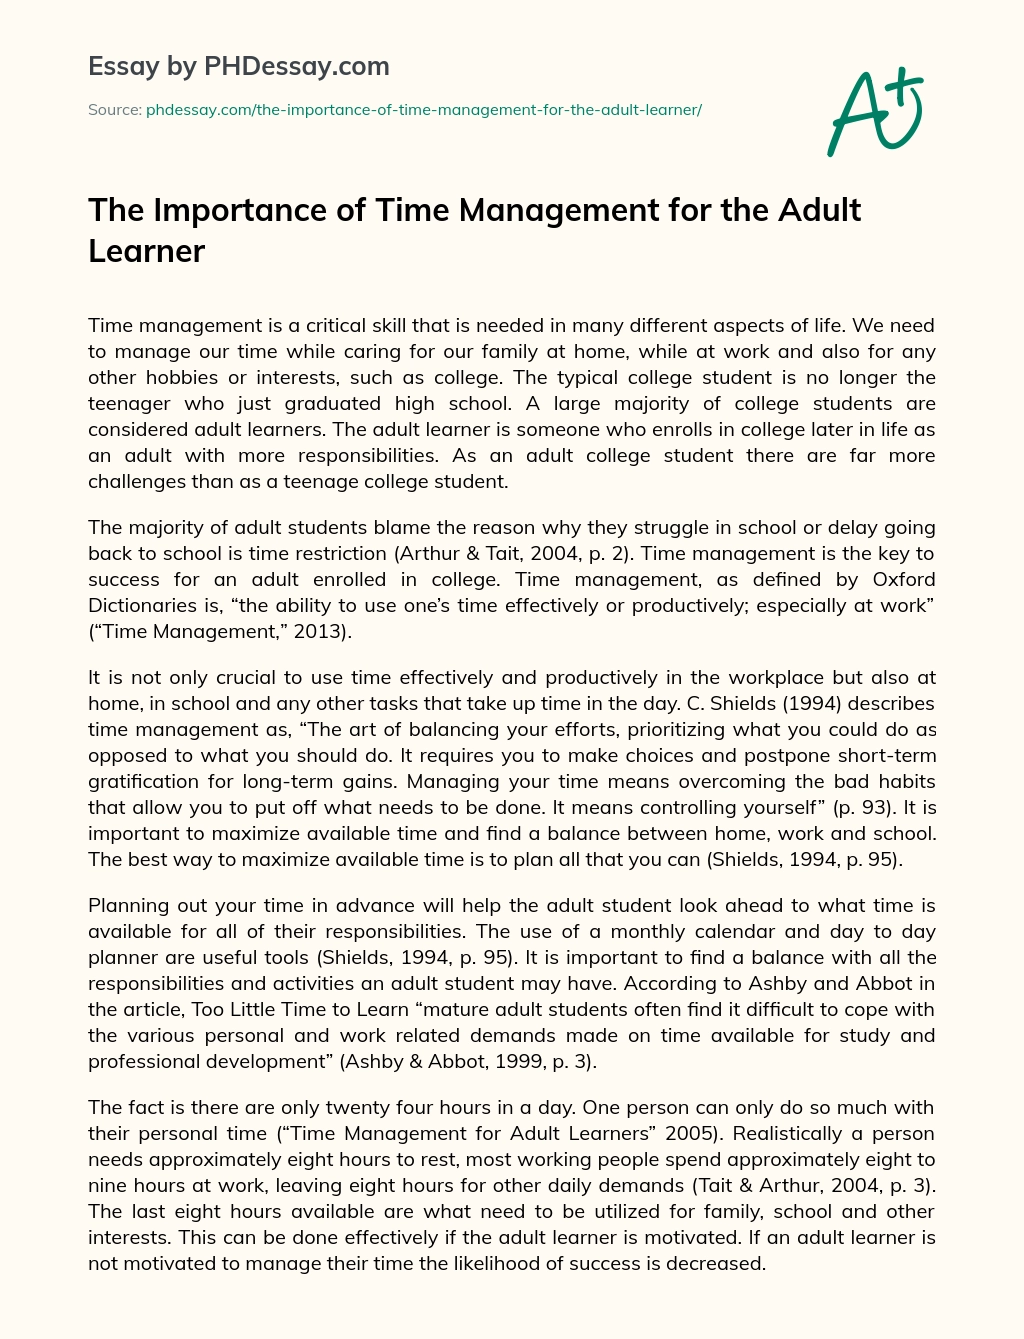 The Importance of Time Management for the Adult Learner essay